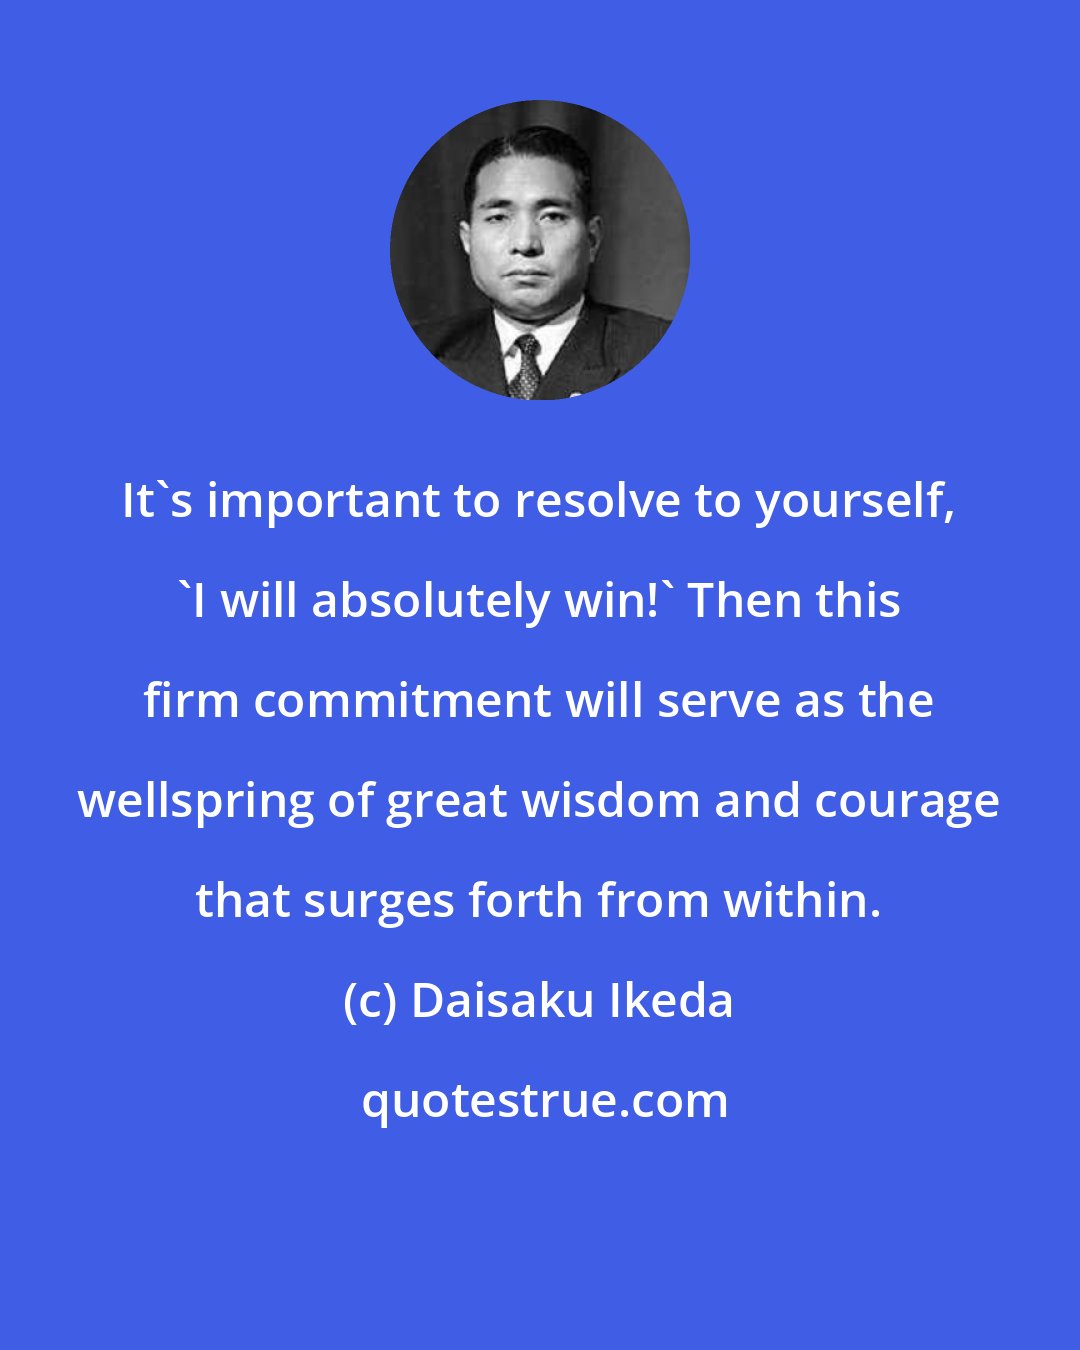 Daisaku Ikeda: It's important to resolve to yourself, 'I will absolutely win!' Then this firm commitment will serve as the wellspring of great wisdom and courage that surges forth from within.